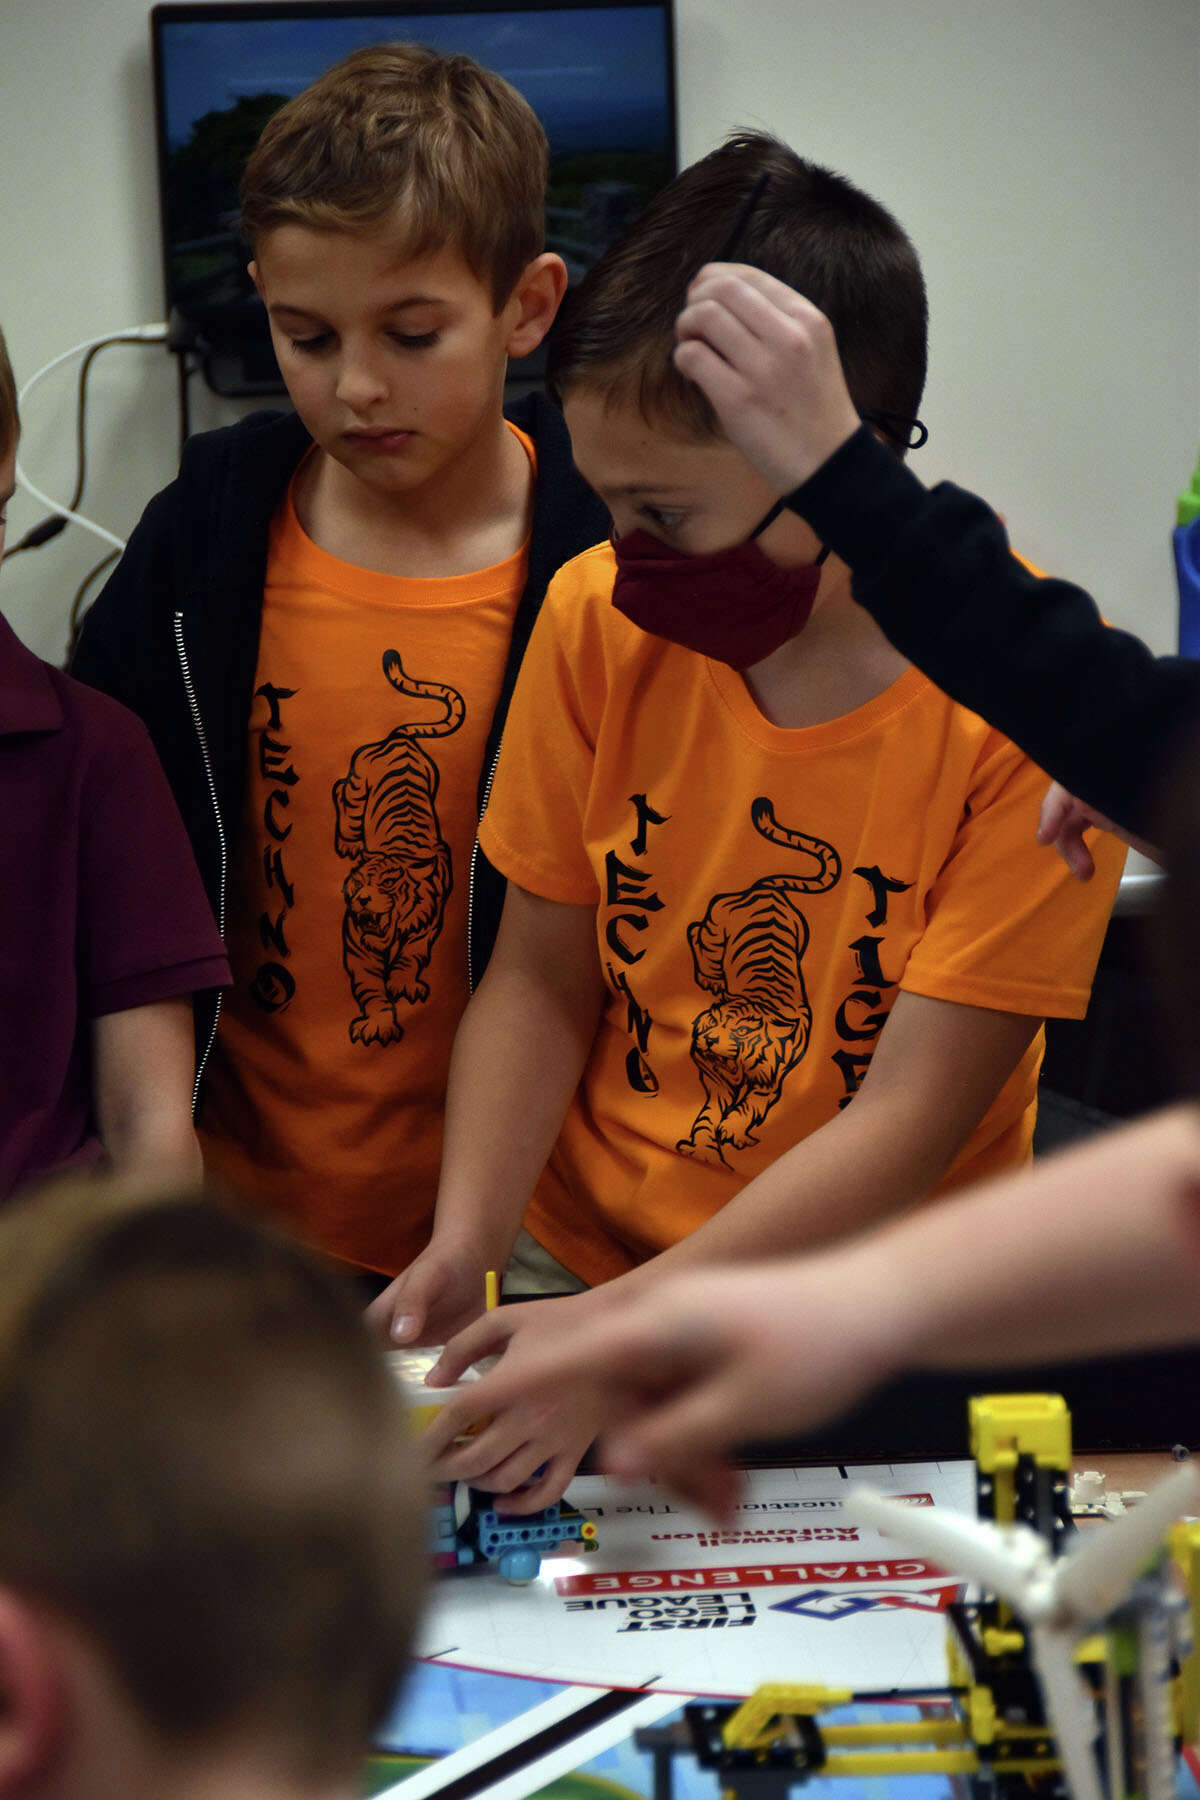 The Techno Tigers earned the Core Values Award at the FLL Qualifier on Dec. 3 and will join the Scrambled Gears team at the FLL State competition Jan. 28. 